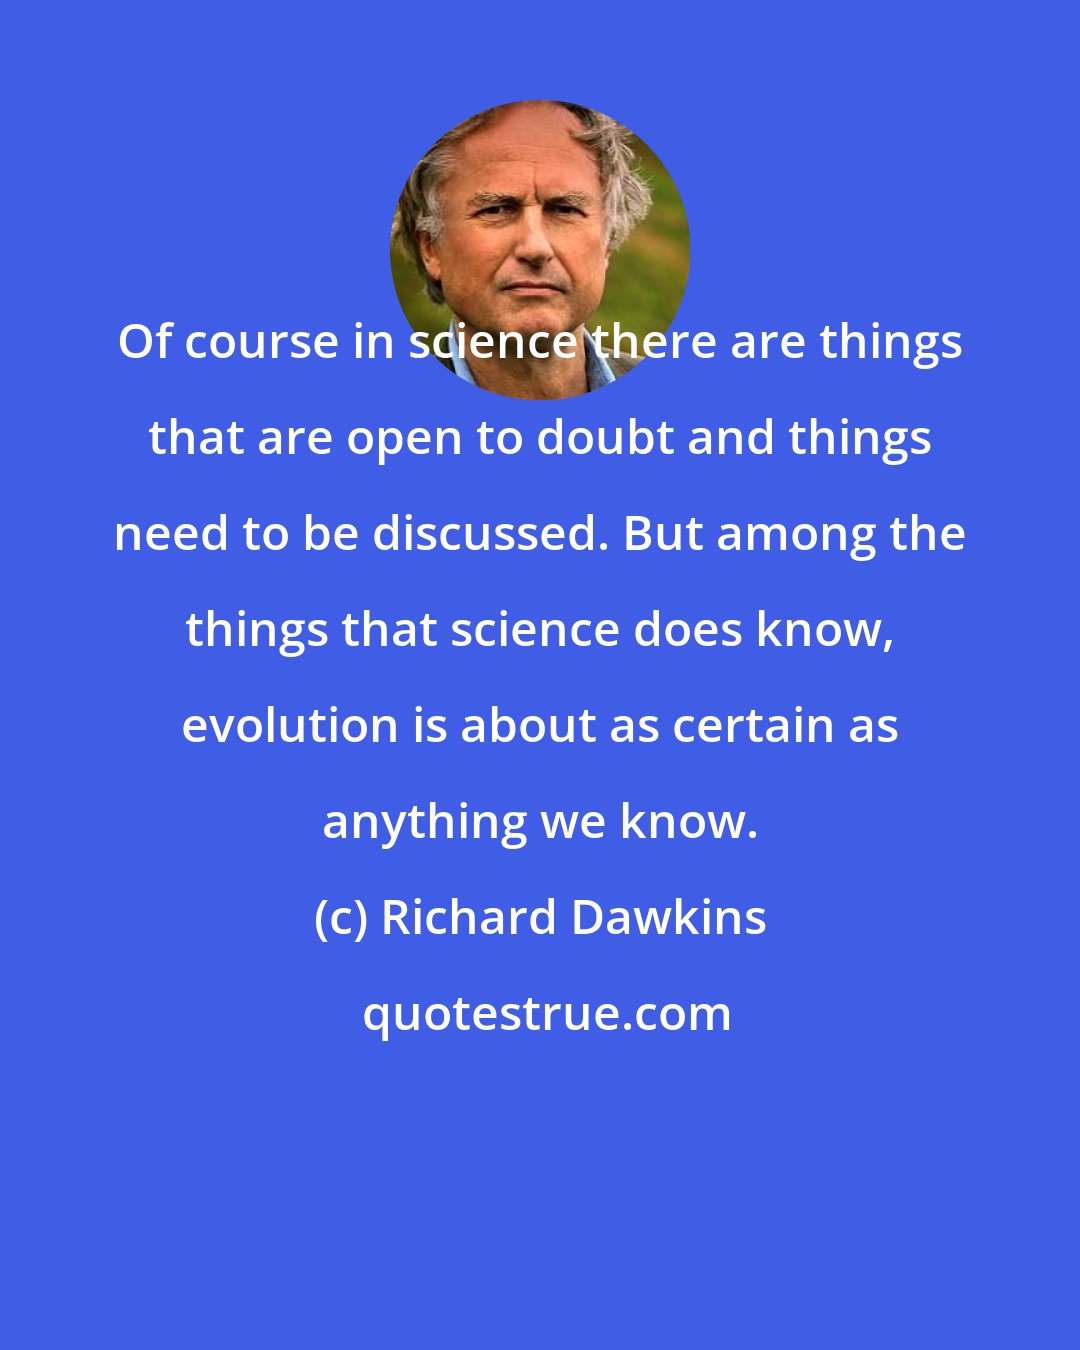 Richard Dawkins: Of course in science there are things that are open to doubt and things need to be discussed. But among the things that science does know, evolution is about as certain as anything we know.